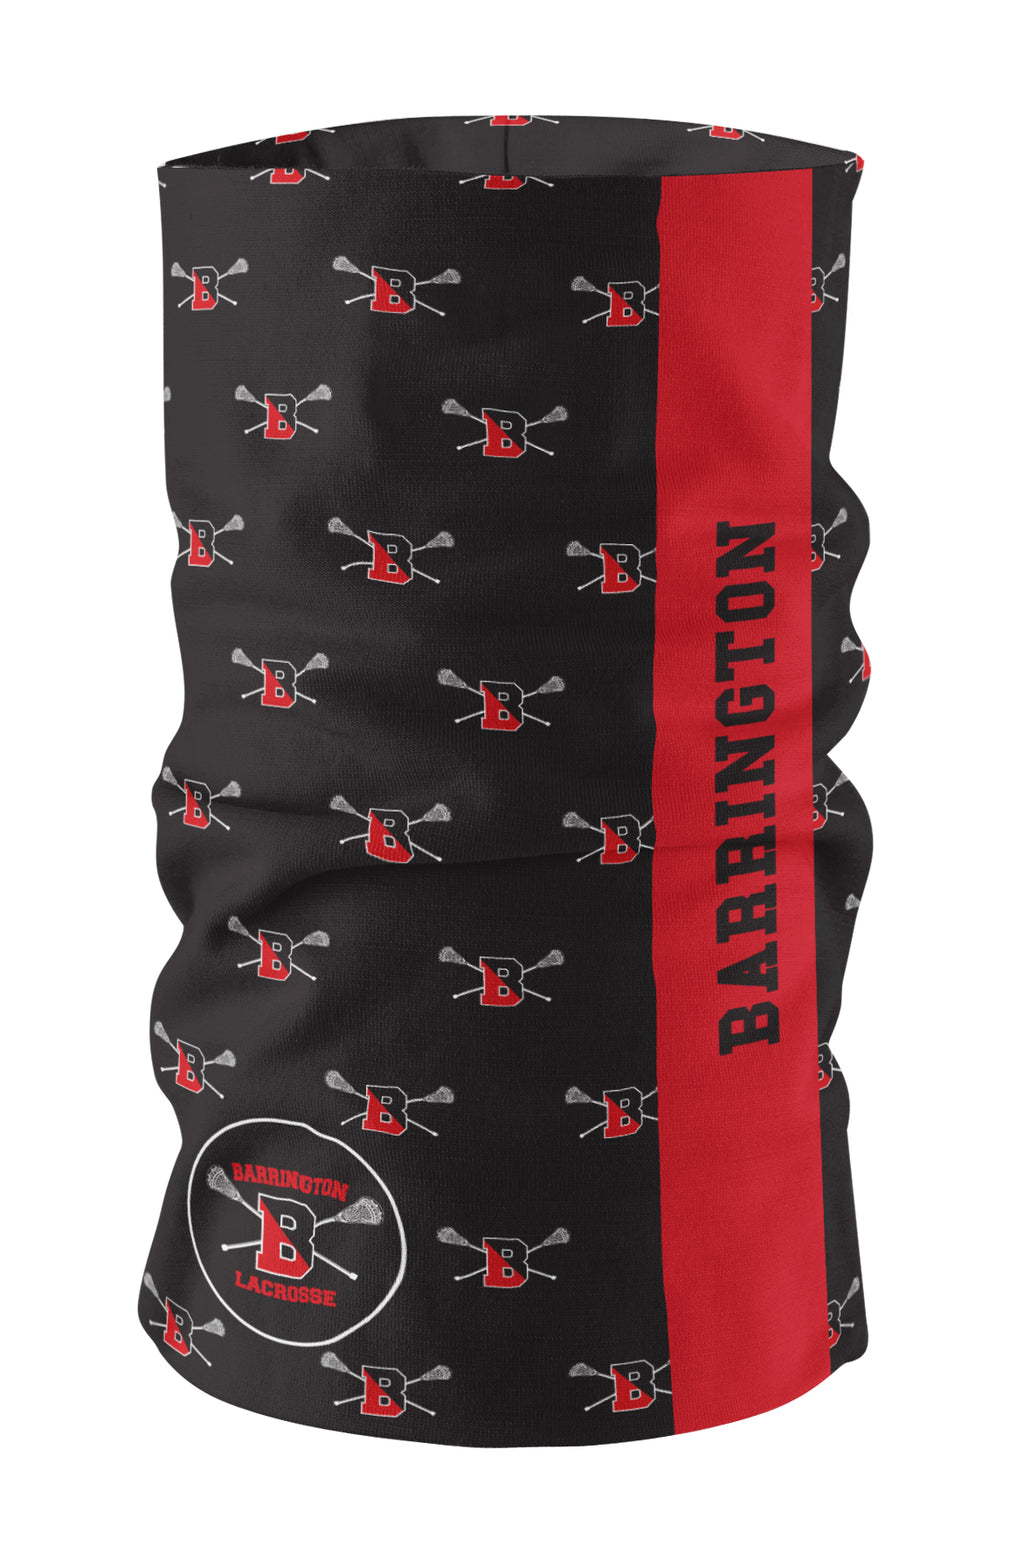 Barrington Youth Lacrosse Performance Gaiter with Ear Slits